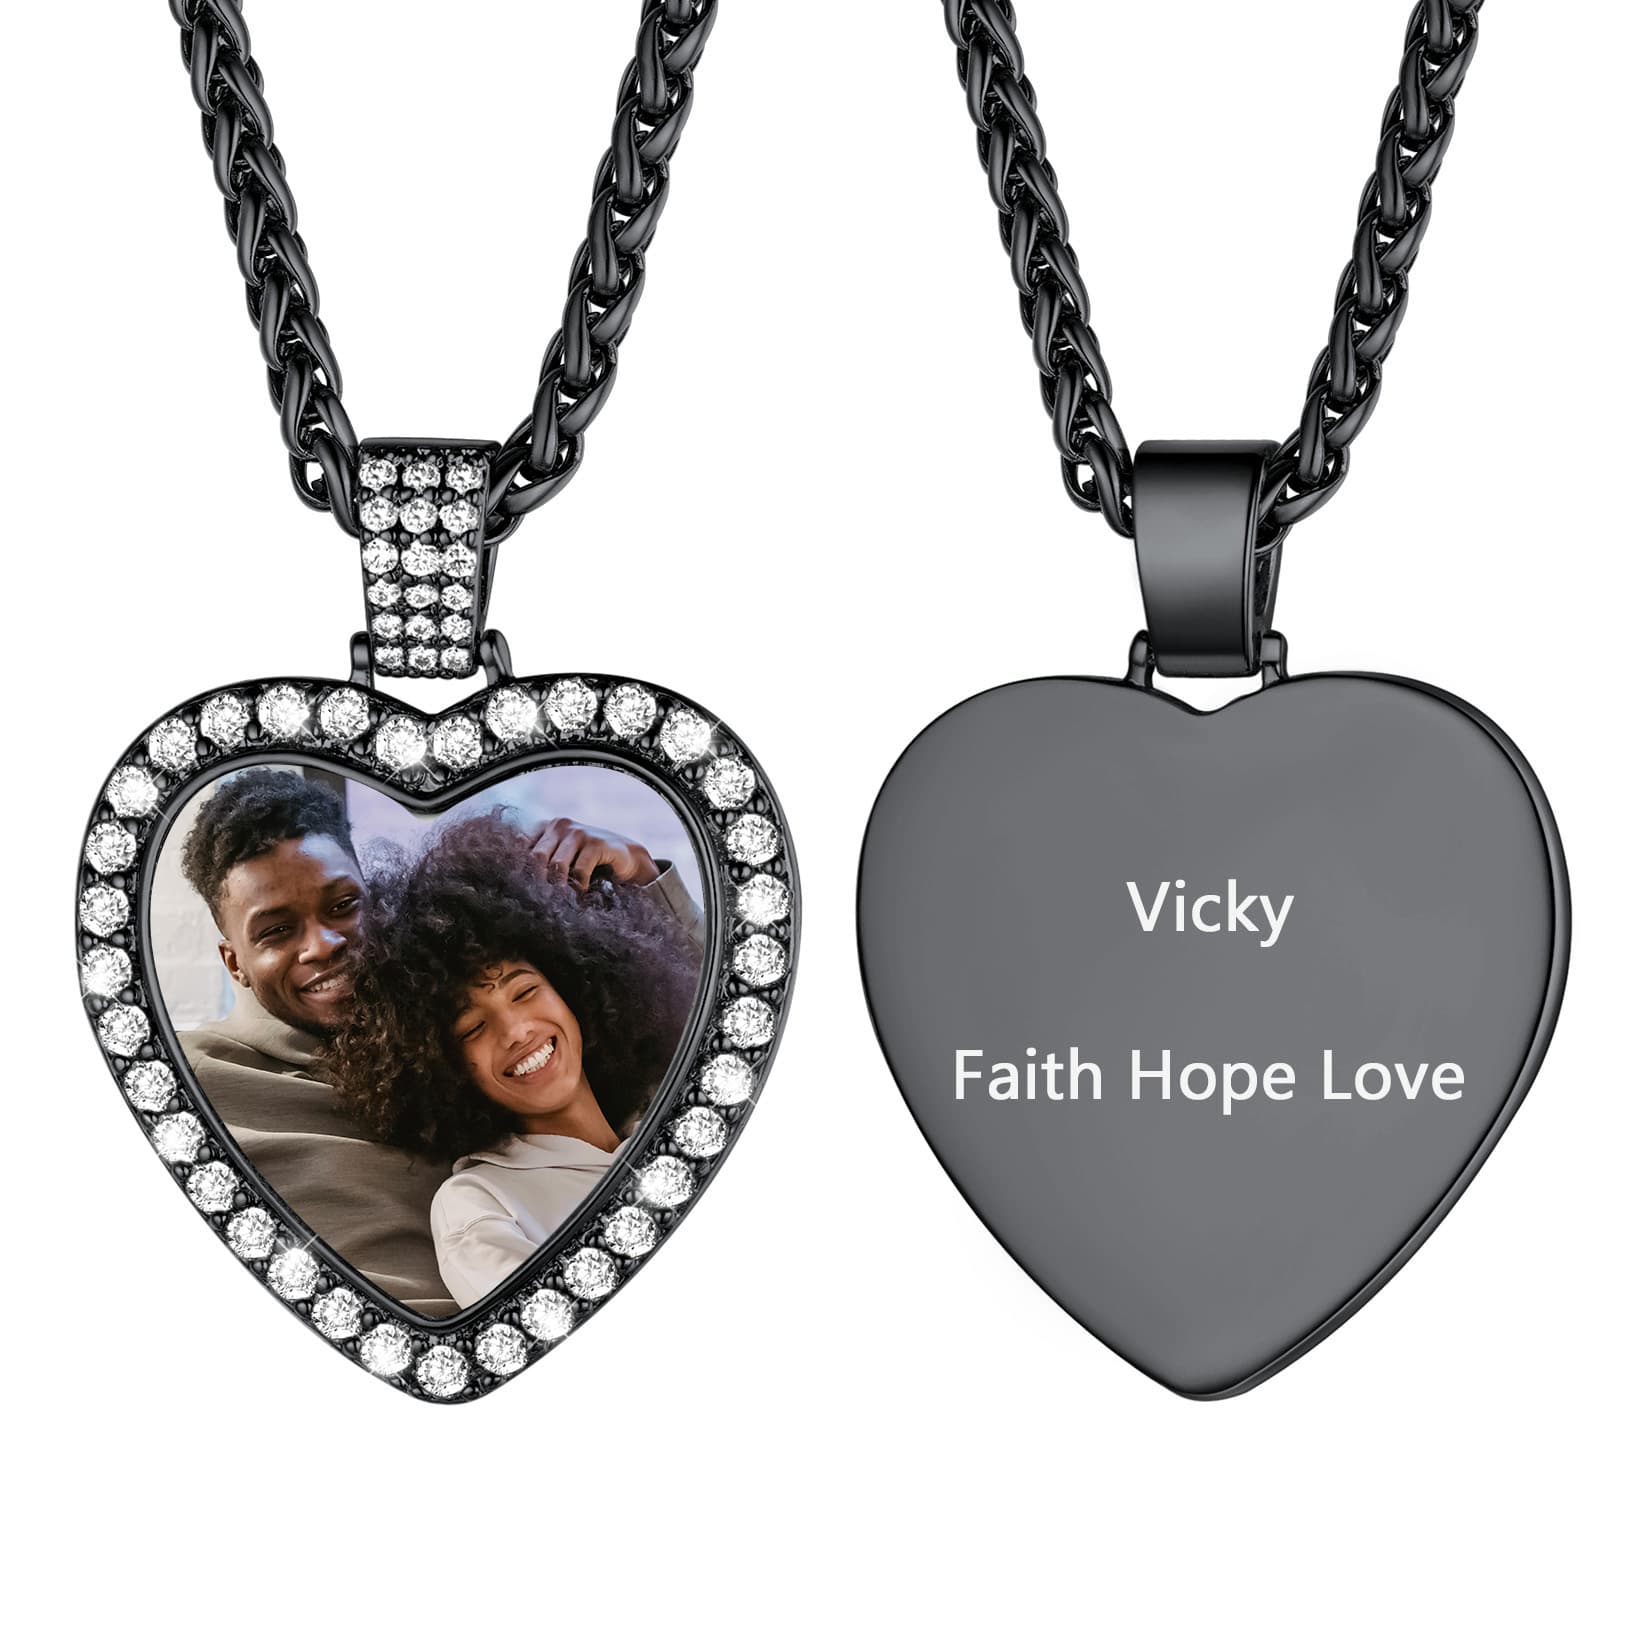 Personalized Heart Photo Pendant Necklace With Cubic Zirconia Black